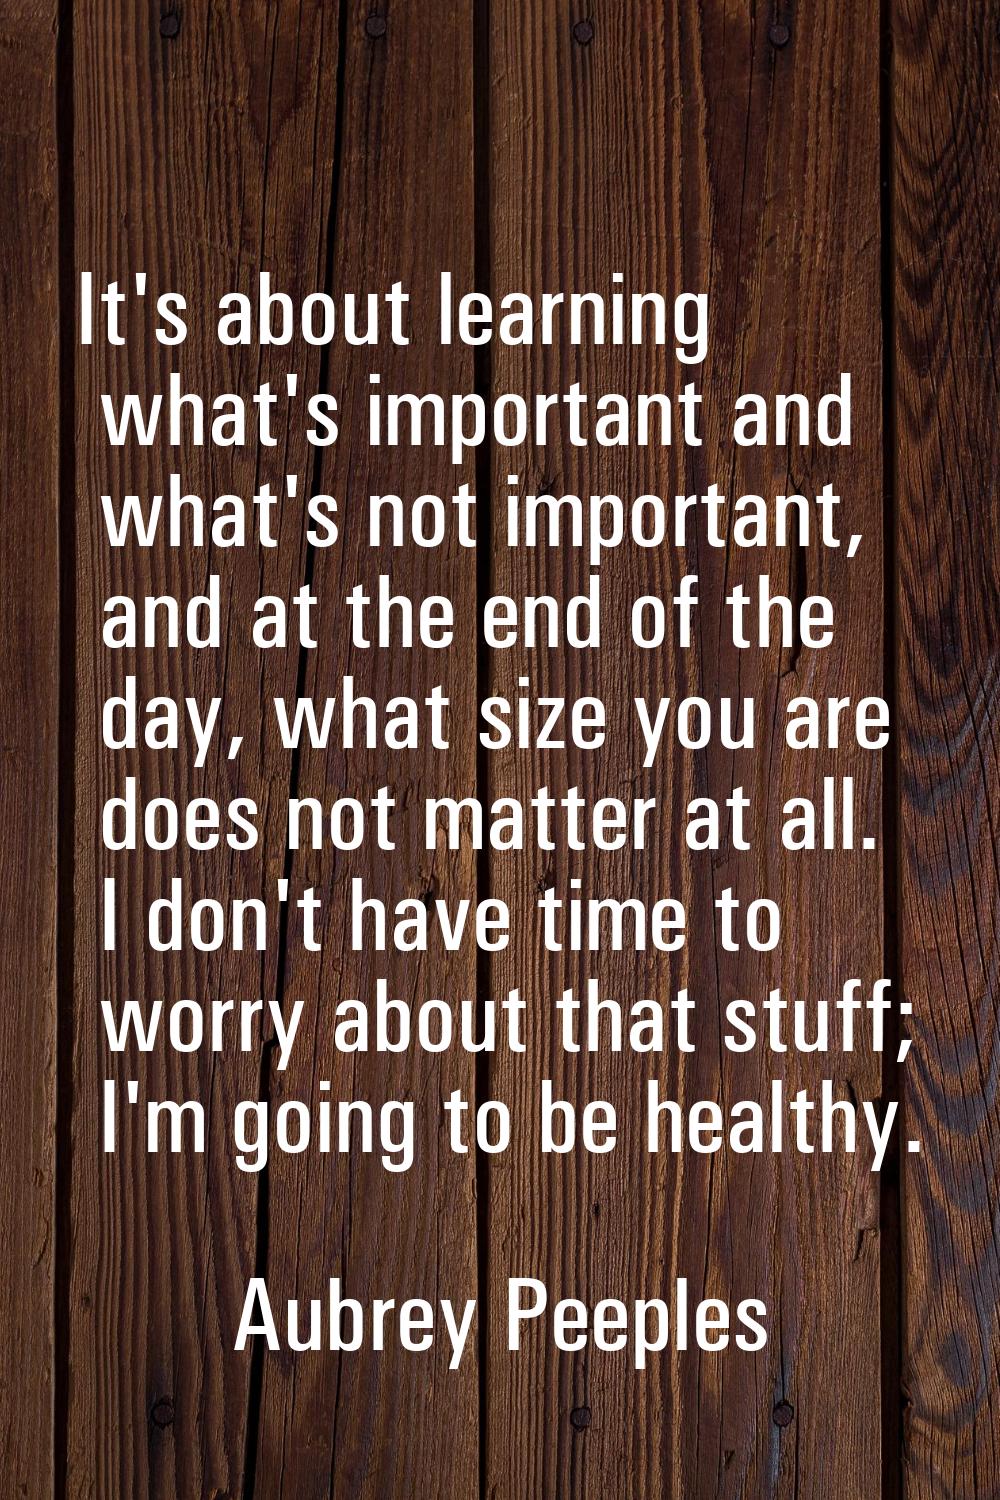 It's about learning what's important and what's not important, and at the end of the day, what size